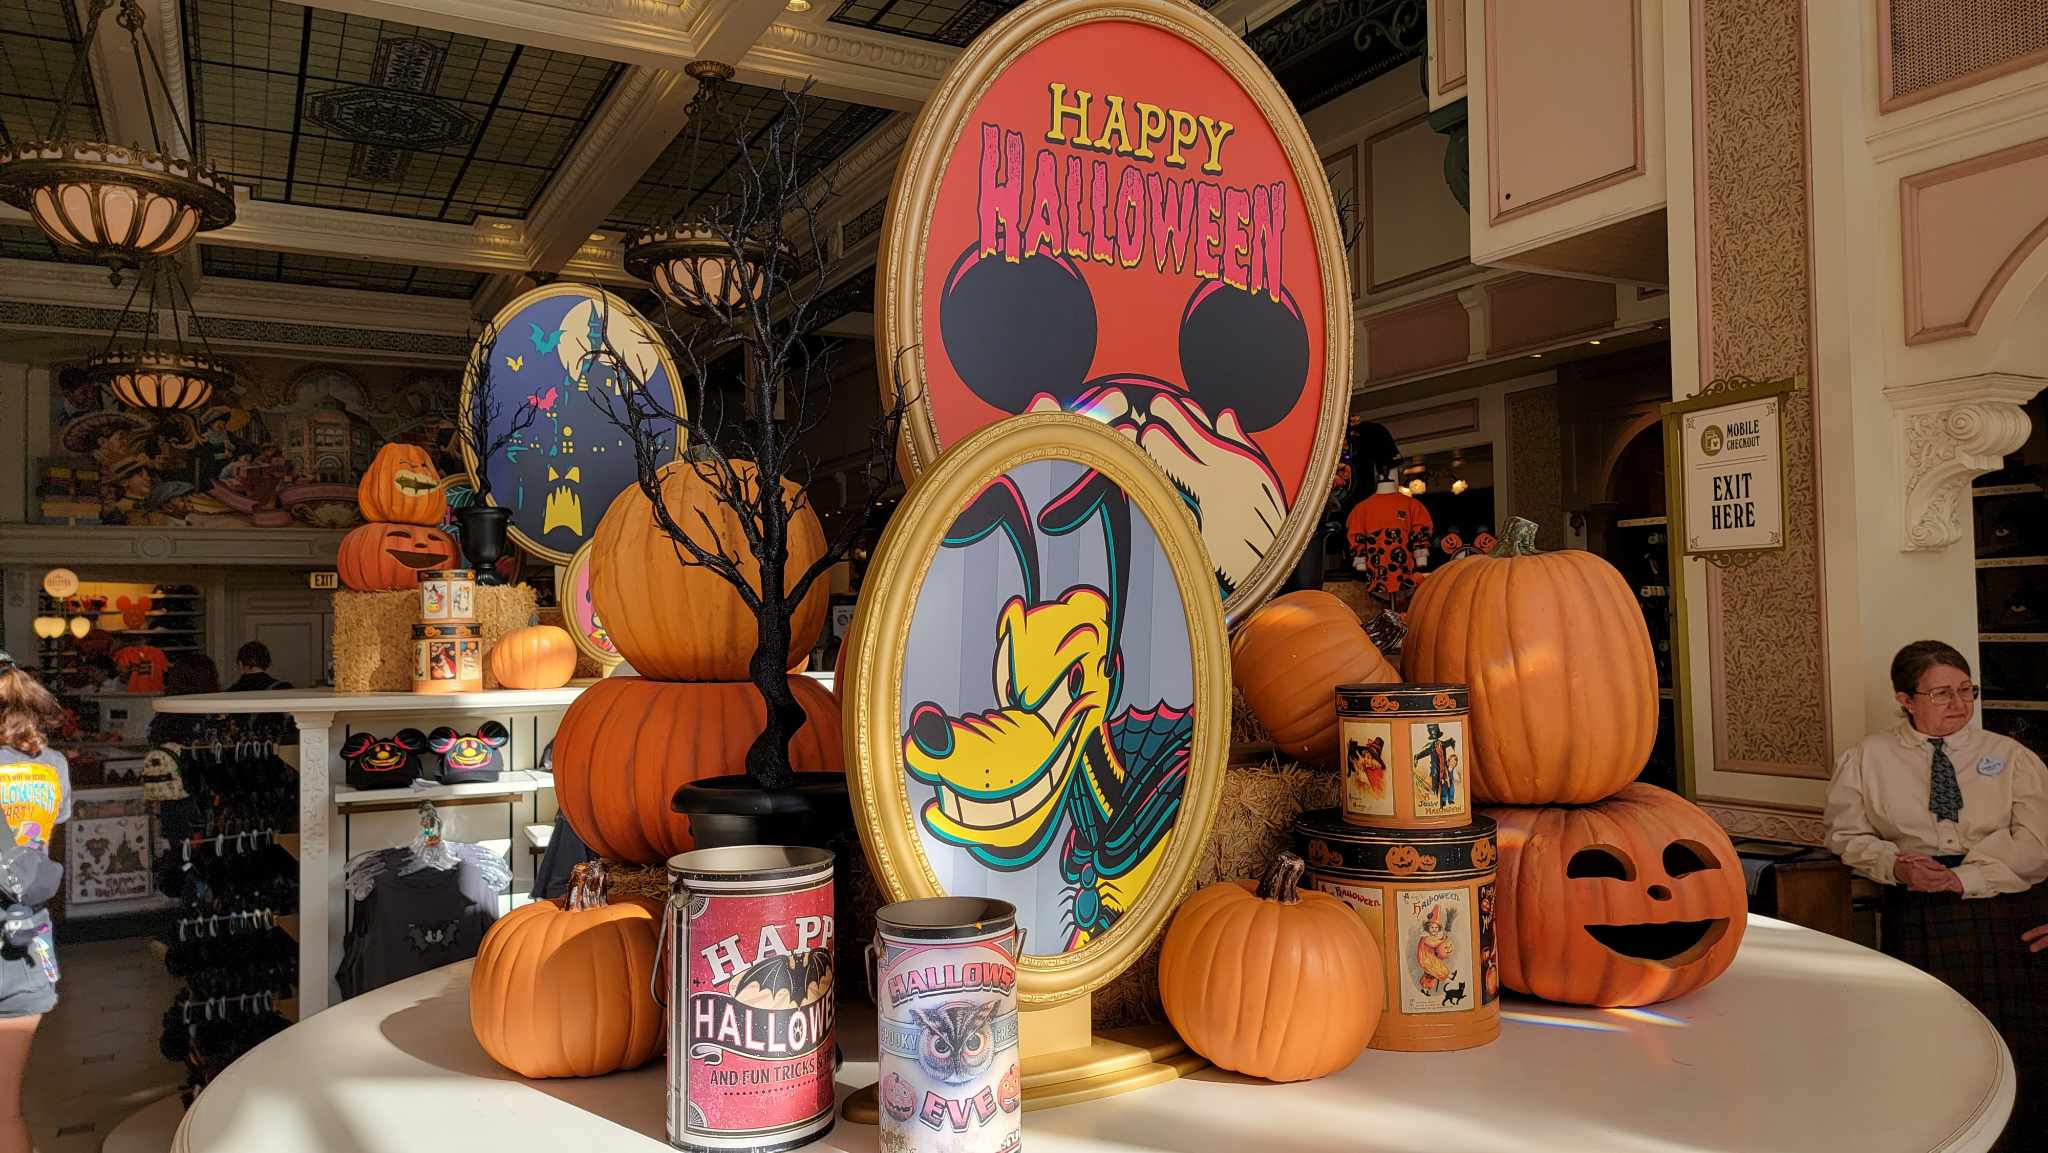 New on shopDisney (4/3/18): 5 Favorites From the New Disney Eats Collection  - Inside the Magic